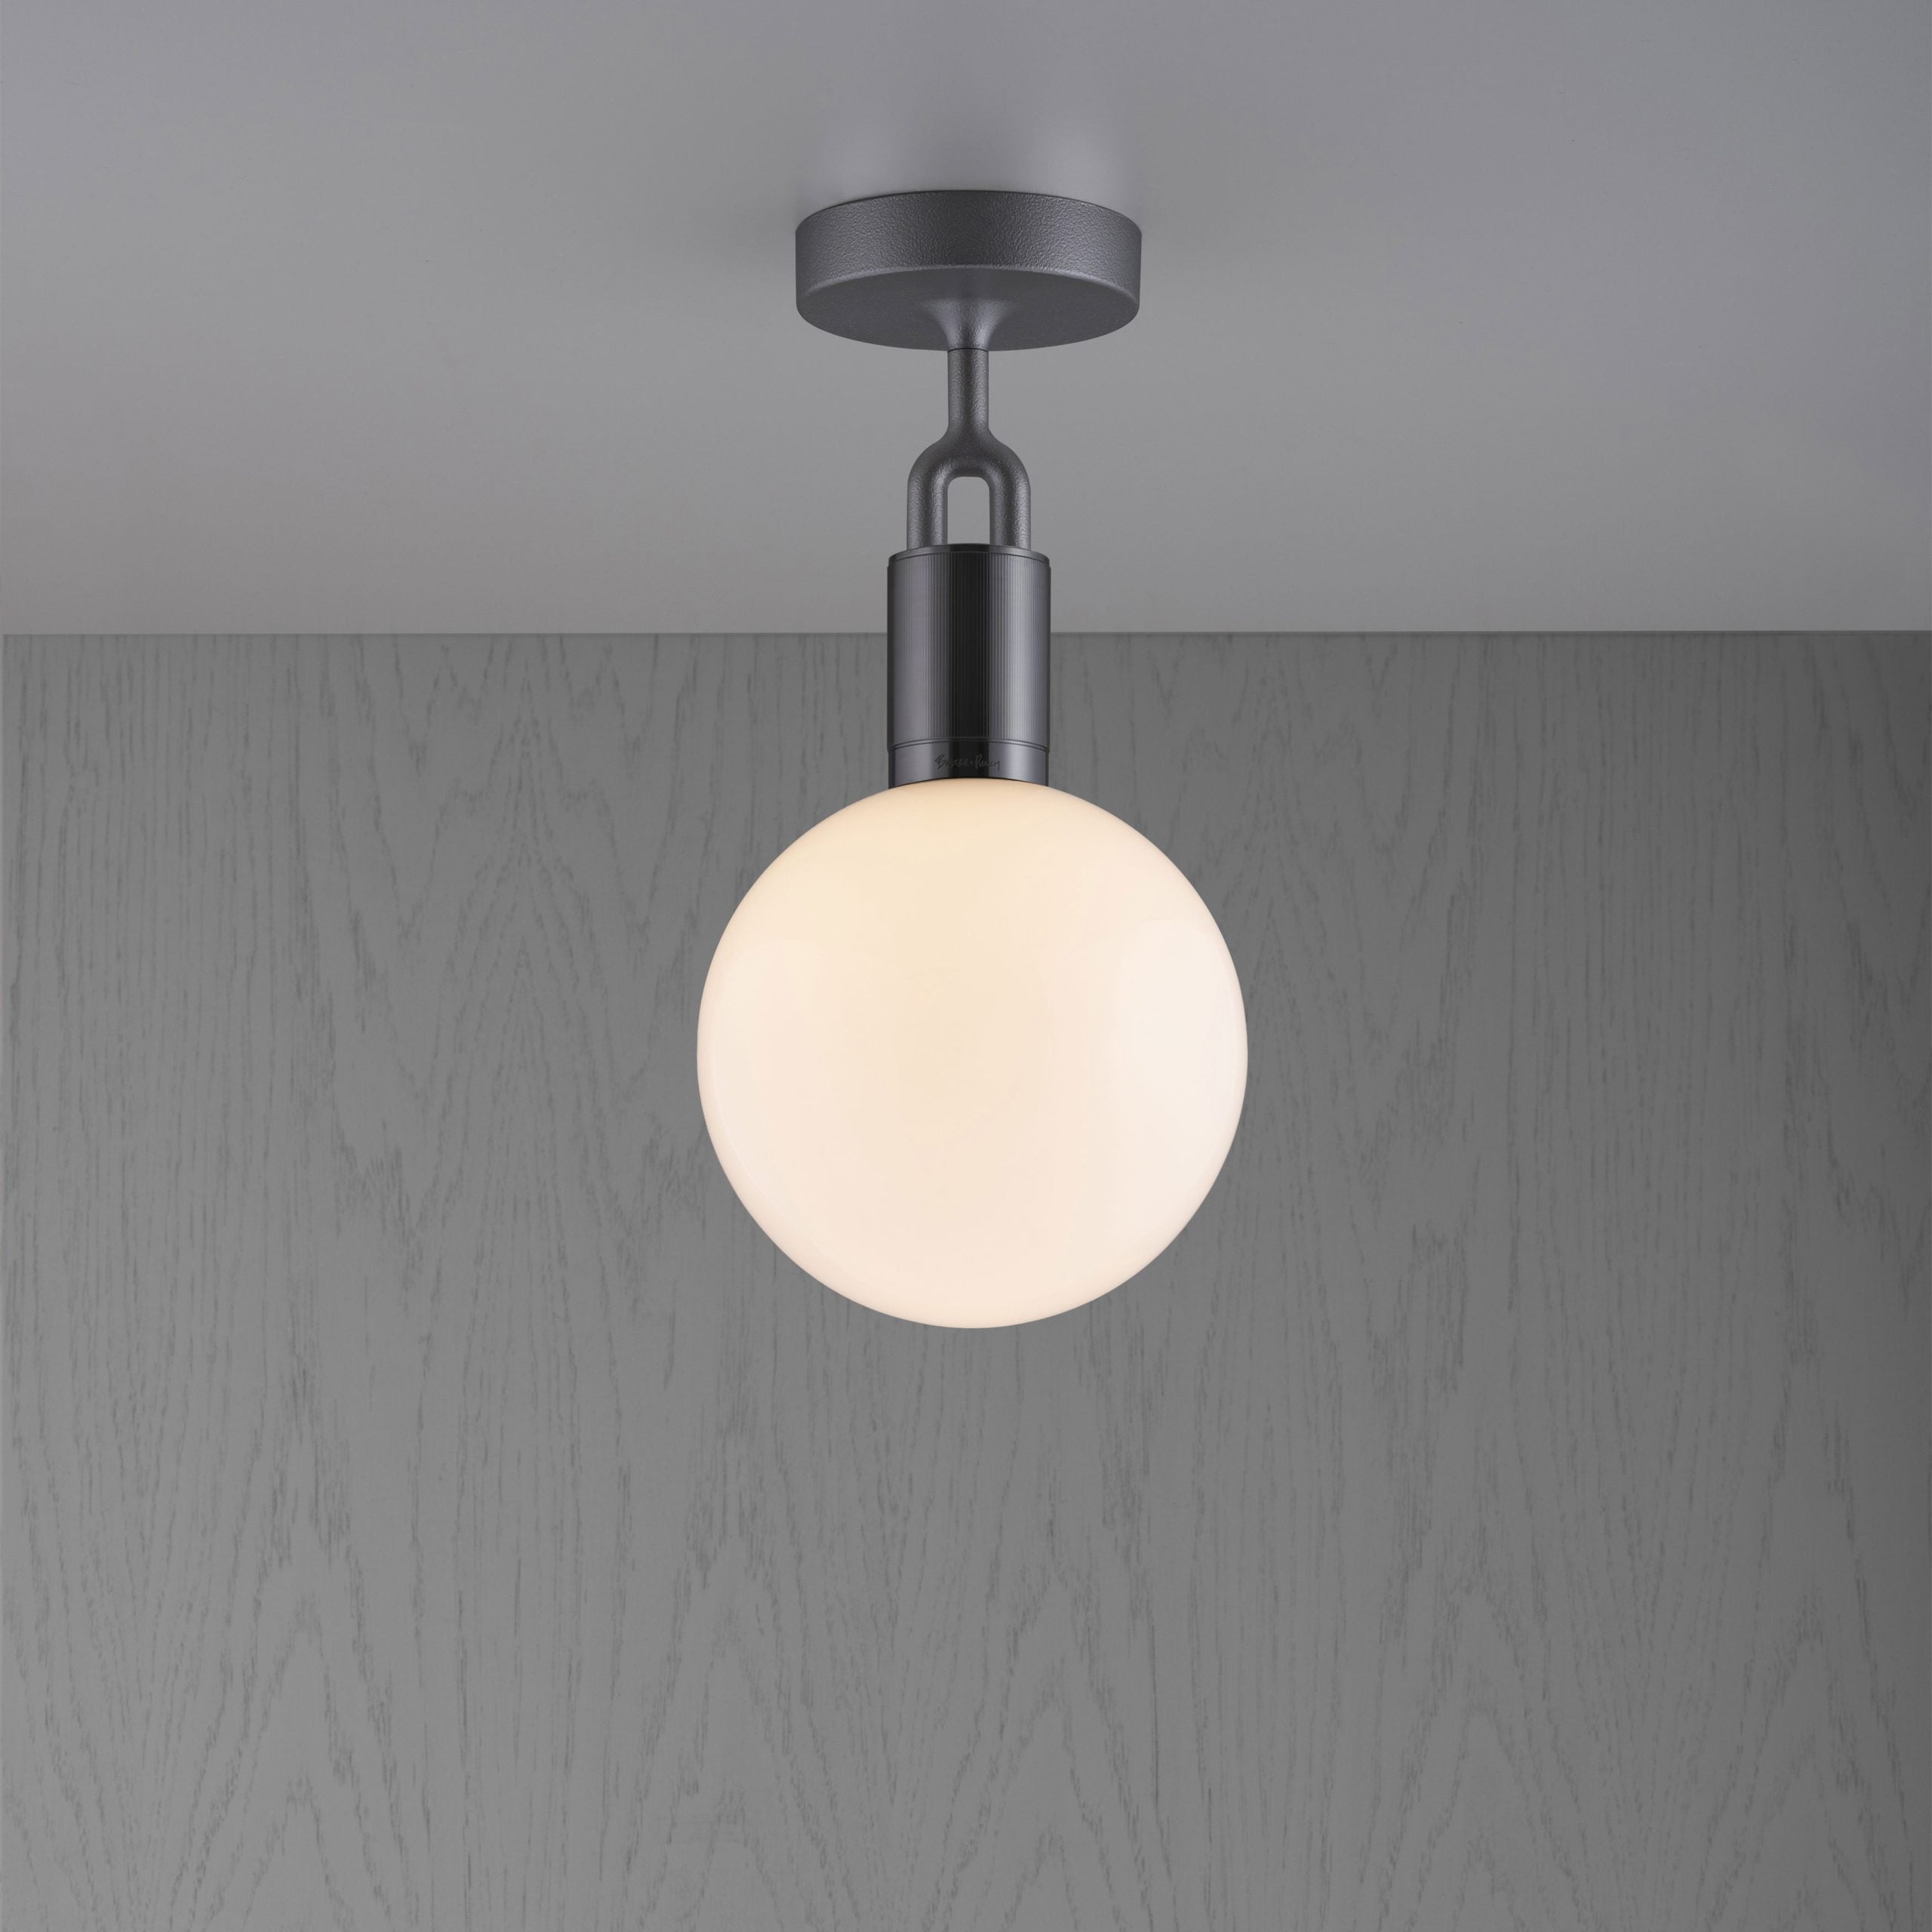 Buster + Punch - NFC-873225 - Forked Ceiling - Globe  - Forked - Gun Metal